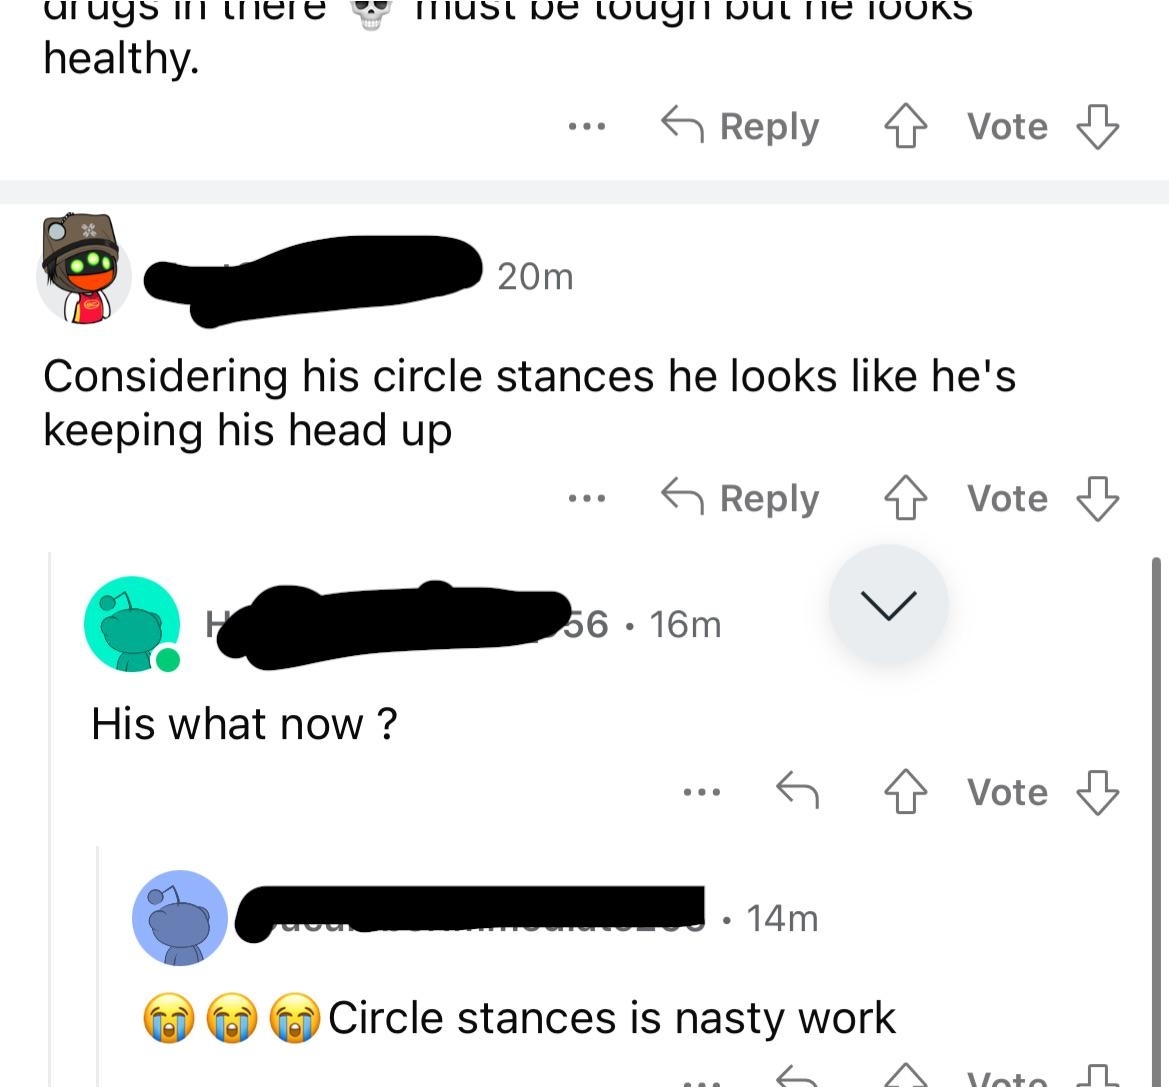 A screenshot of a social media conversation about someone&#x27;s resilience in a situation and text including. &quot;Considering his circle stances he looks like he&#x27;s keeping his head up&quot;